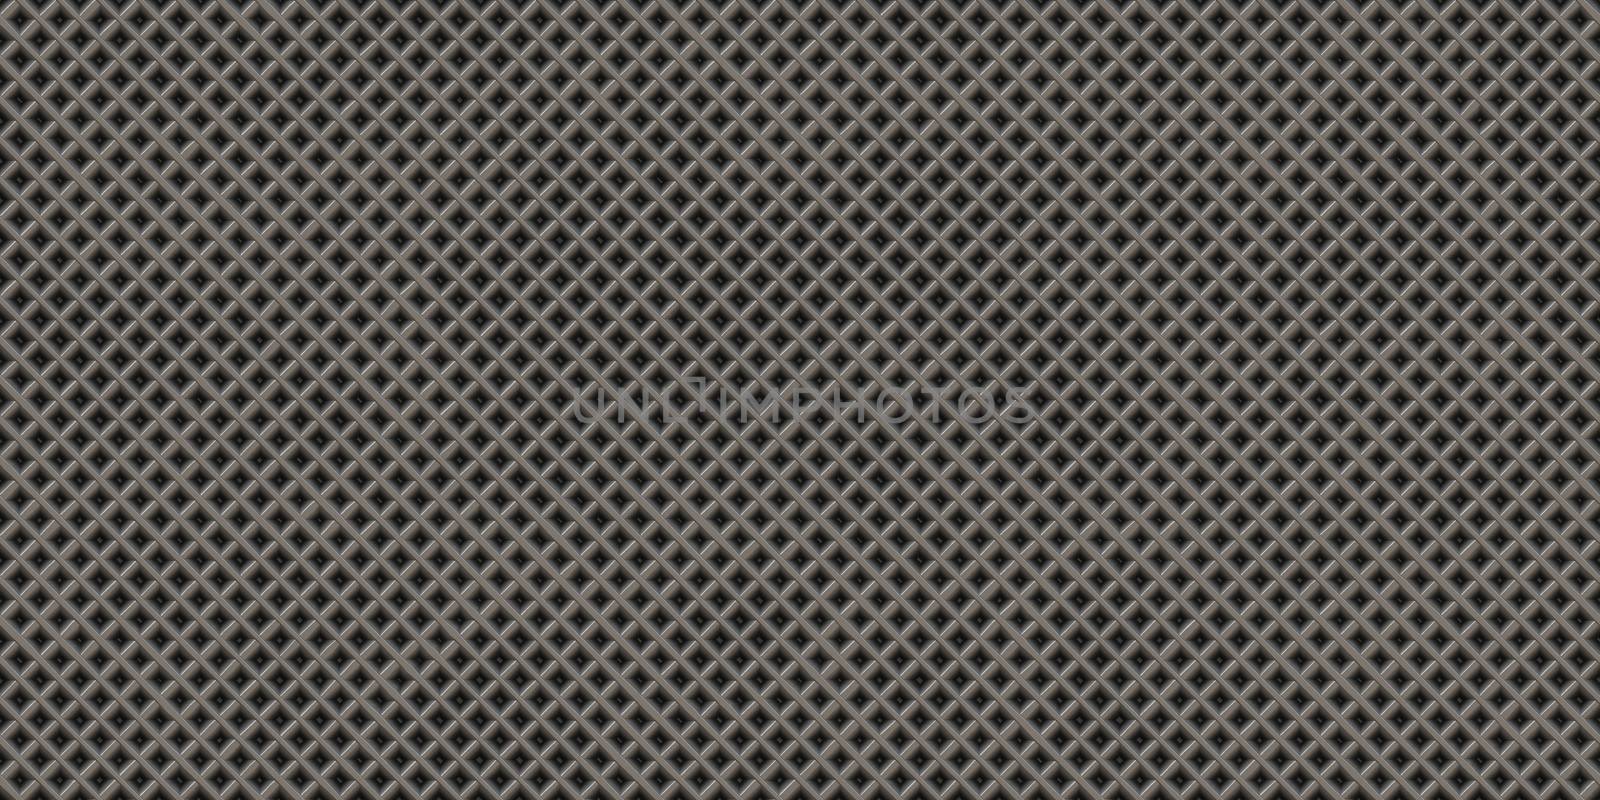 Metal rhombus pattern surface. Knurling touch texture. Knurl contact surface background.